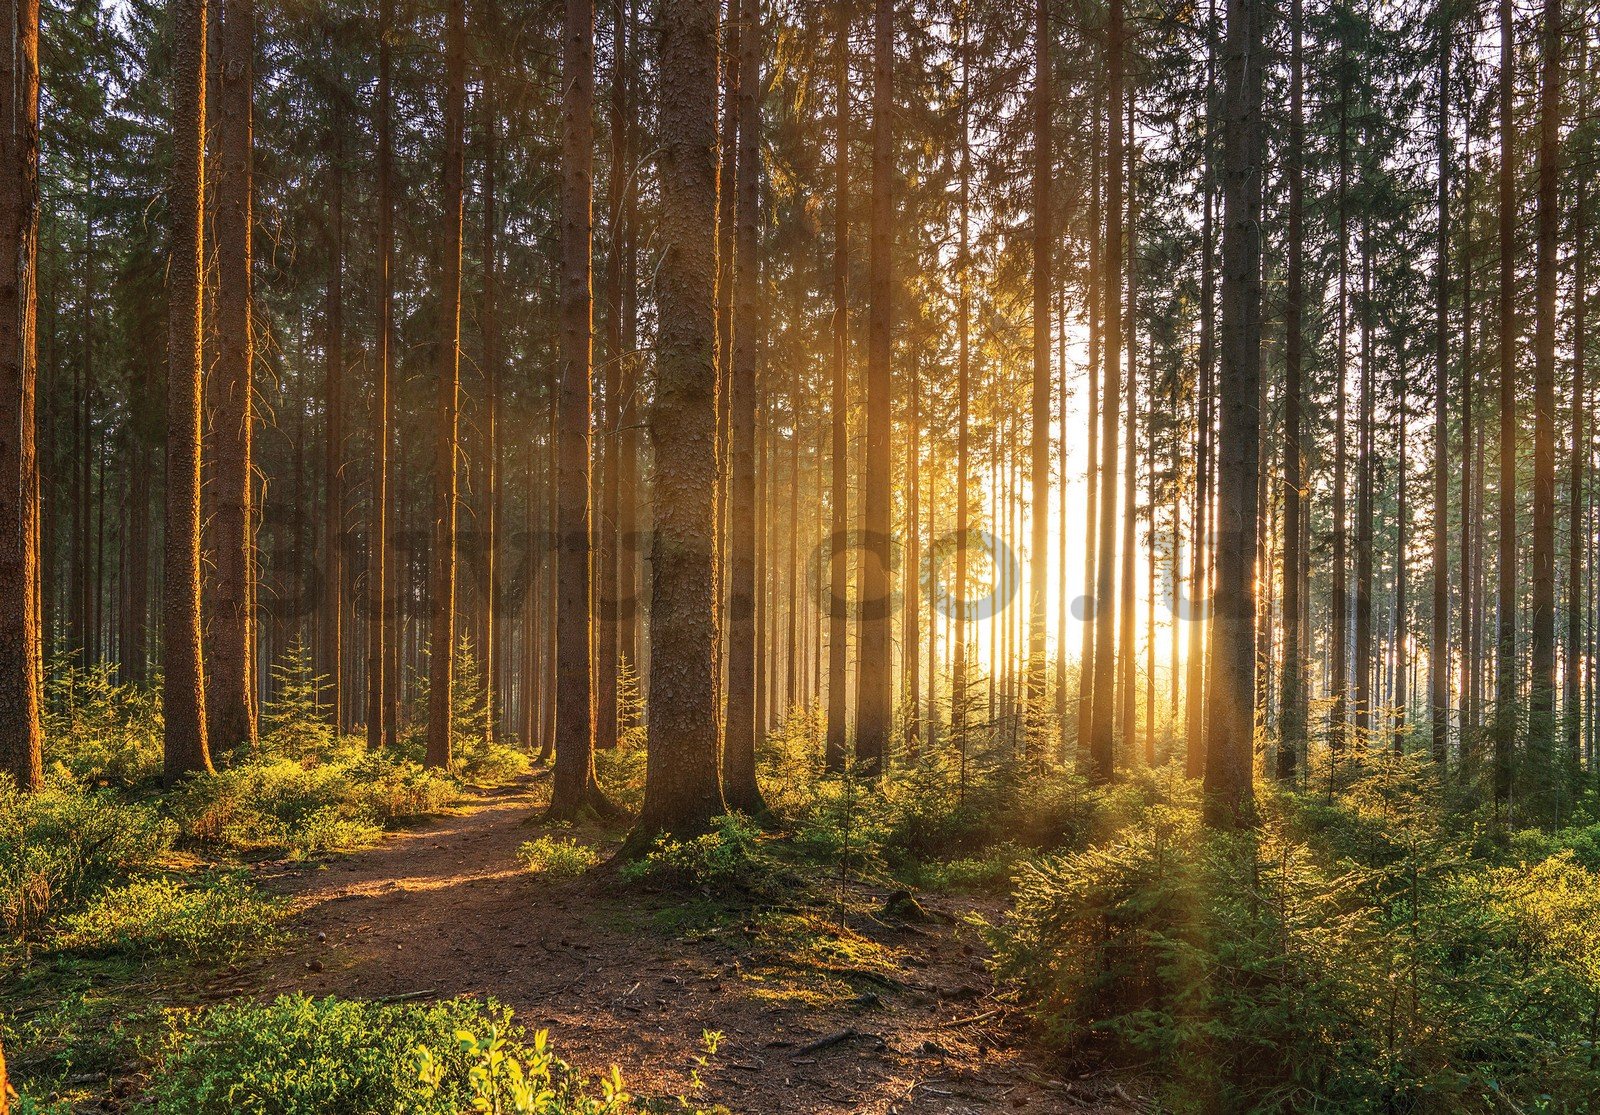 Wall mural vlies: Sunset in the forest (2) - 368x254 cm